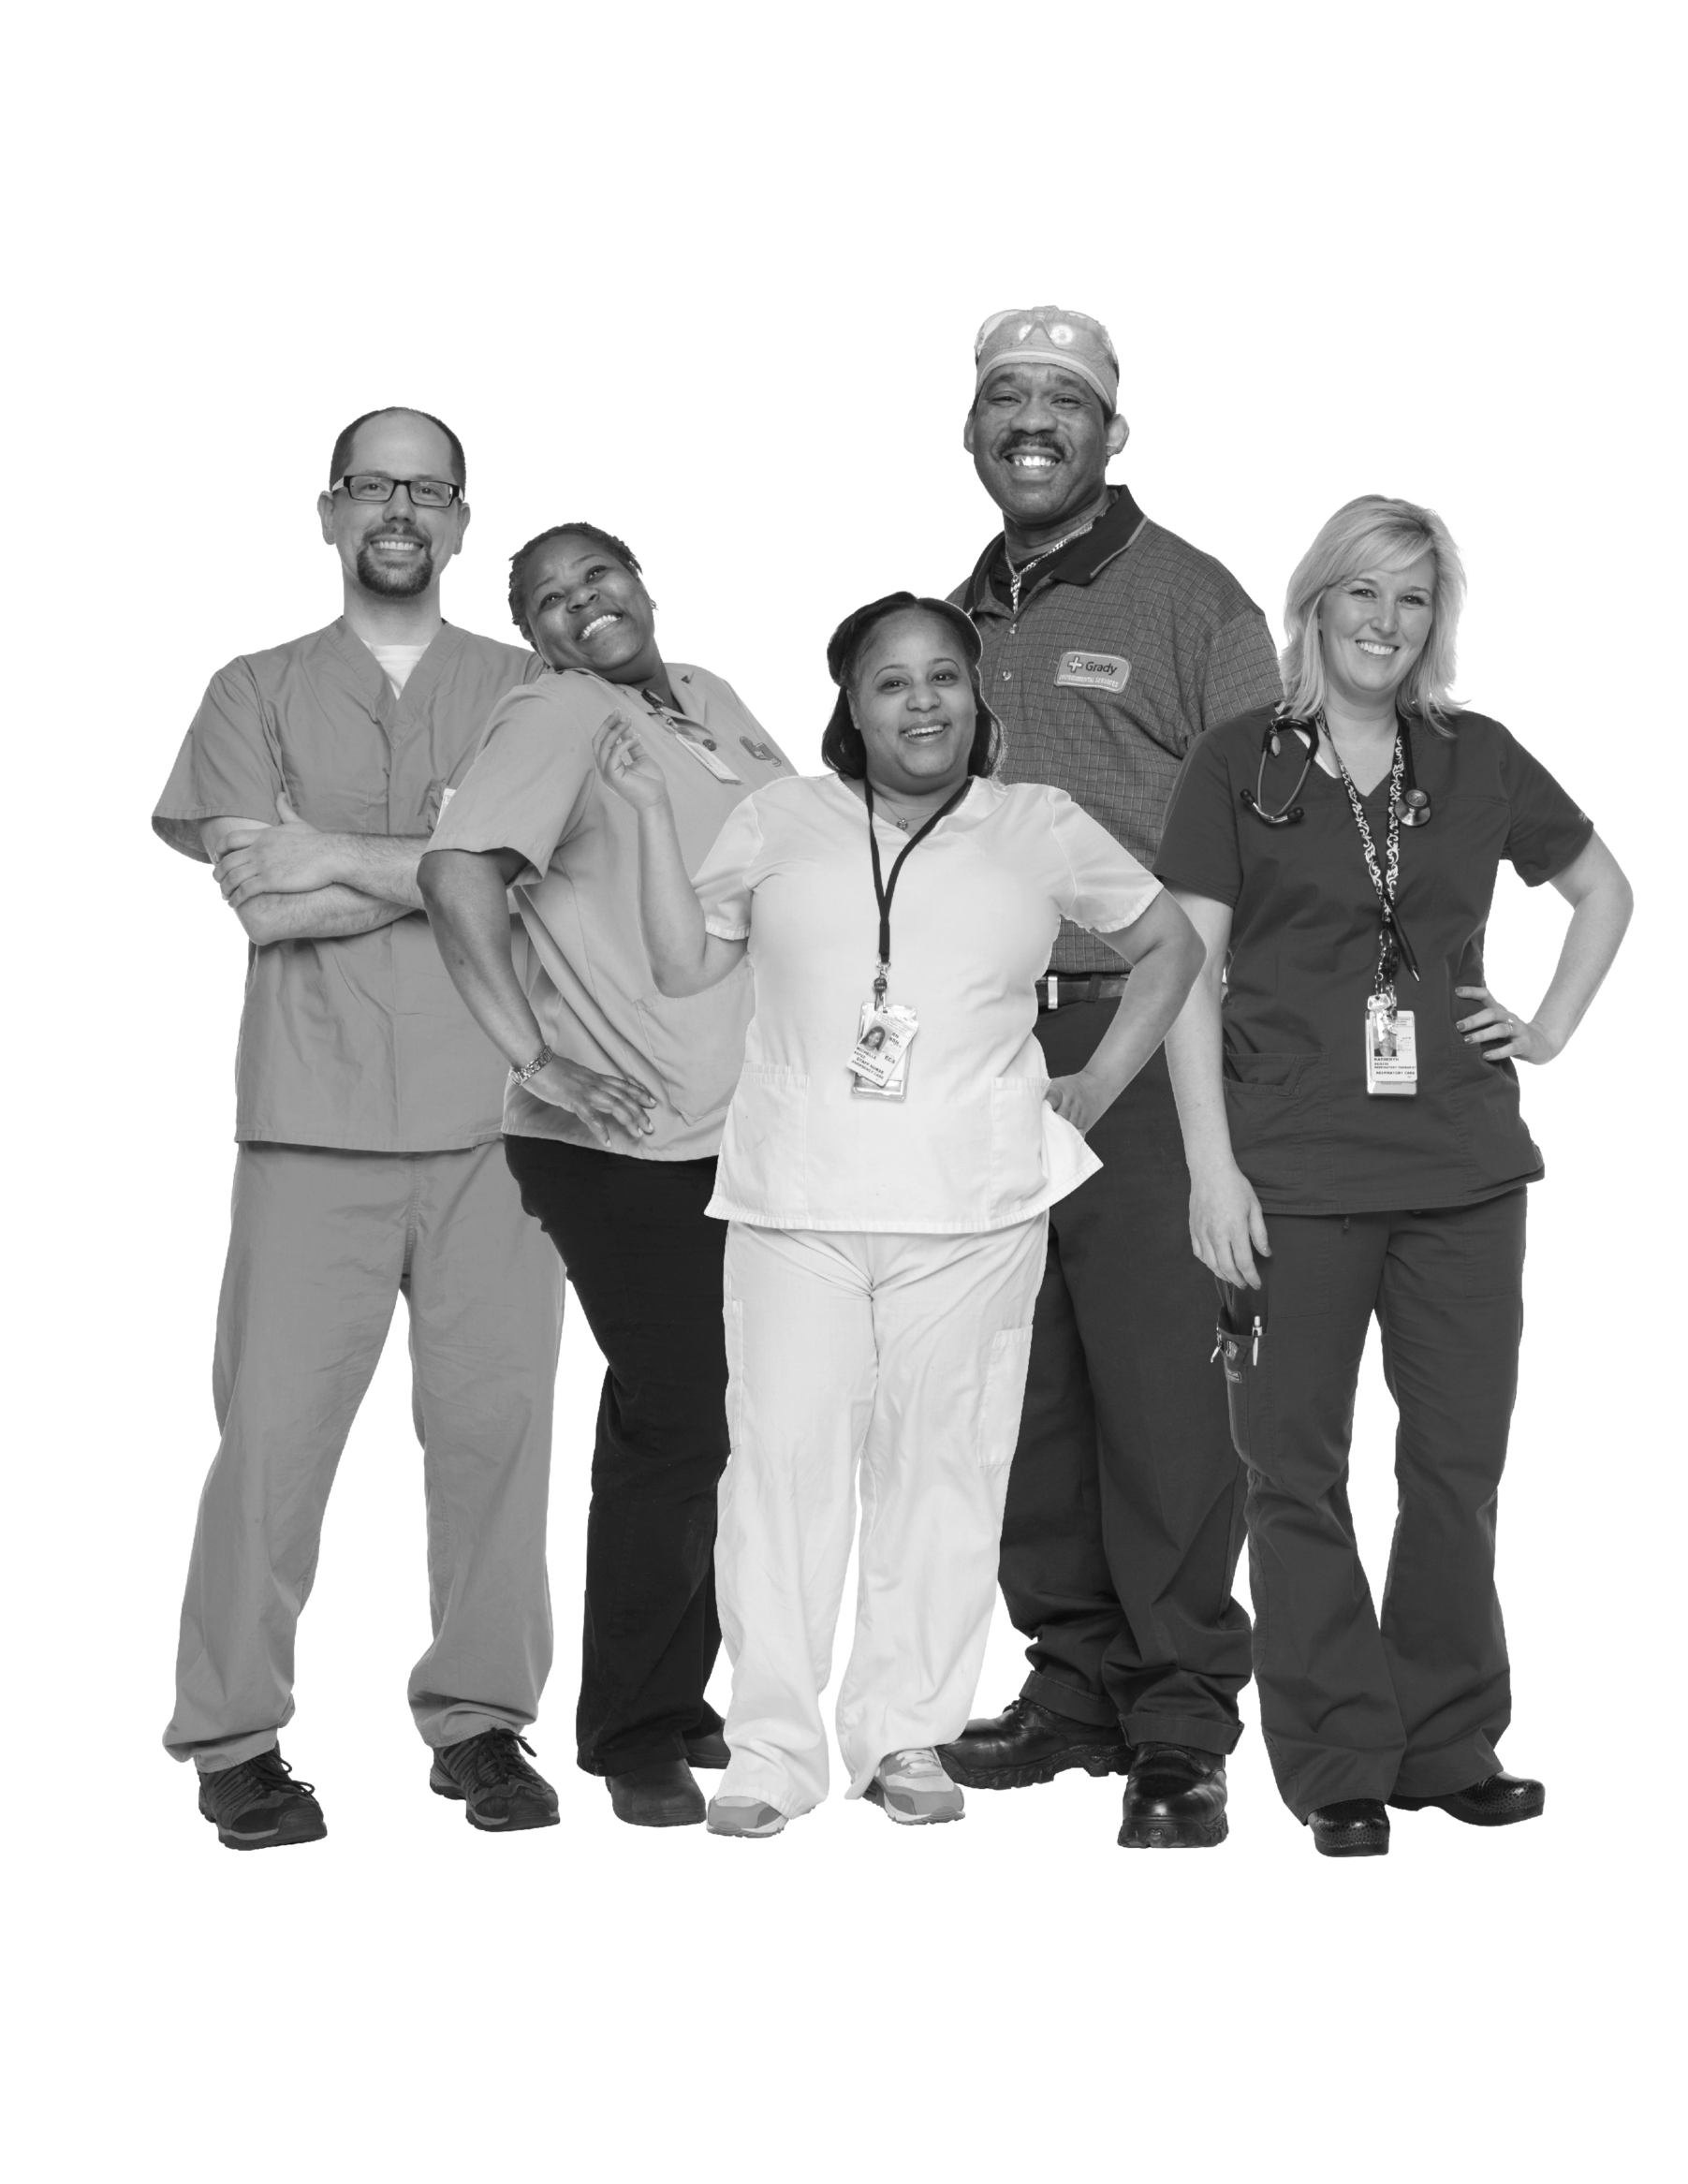 Great hospitals need more than just doctors and nurses - it takes a skilled group working together to make us successful. WE ARE GRADY.